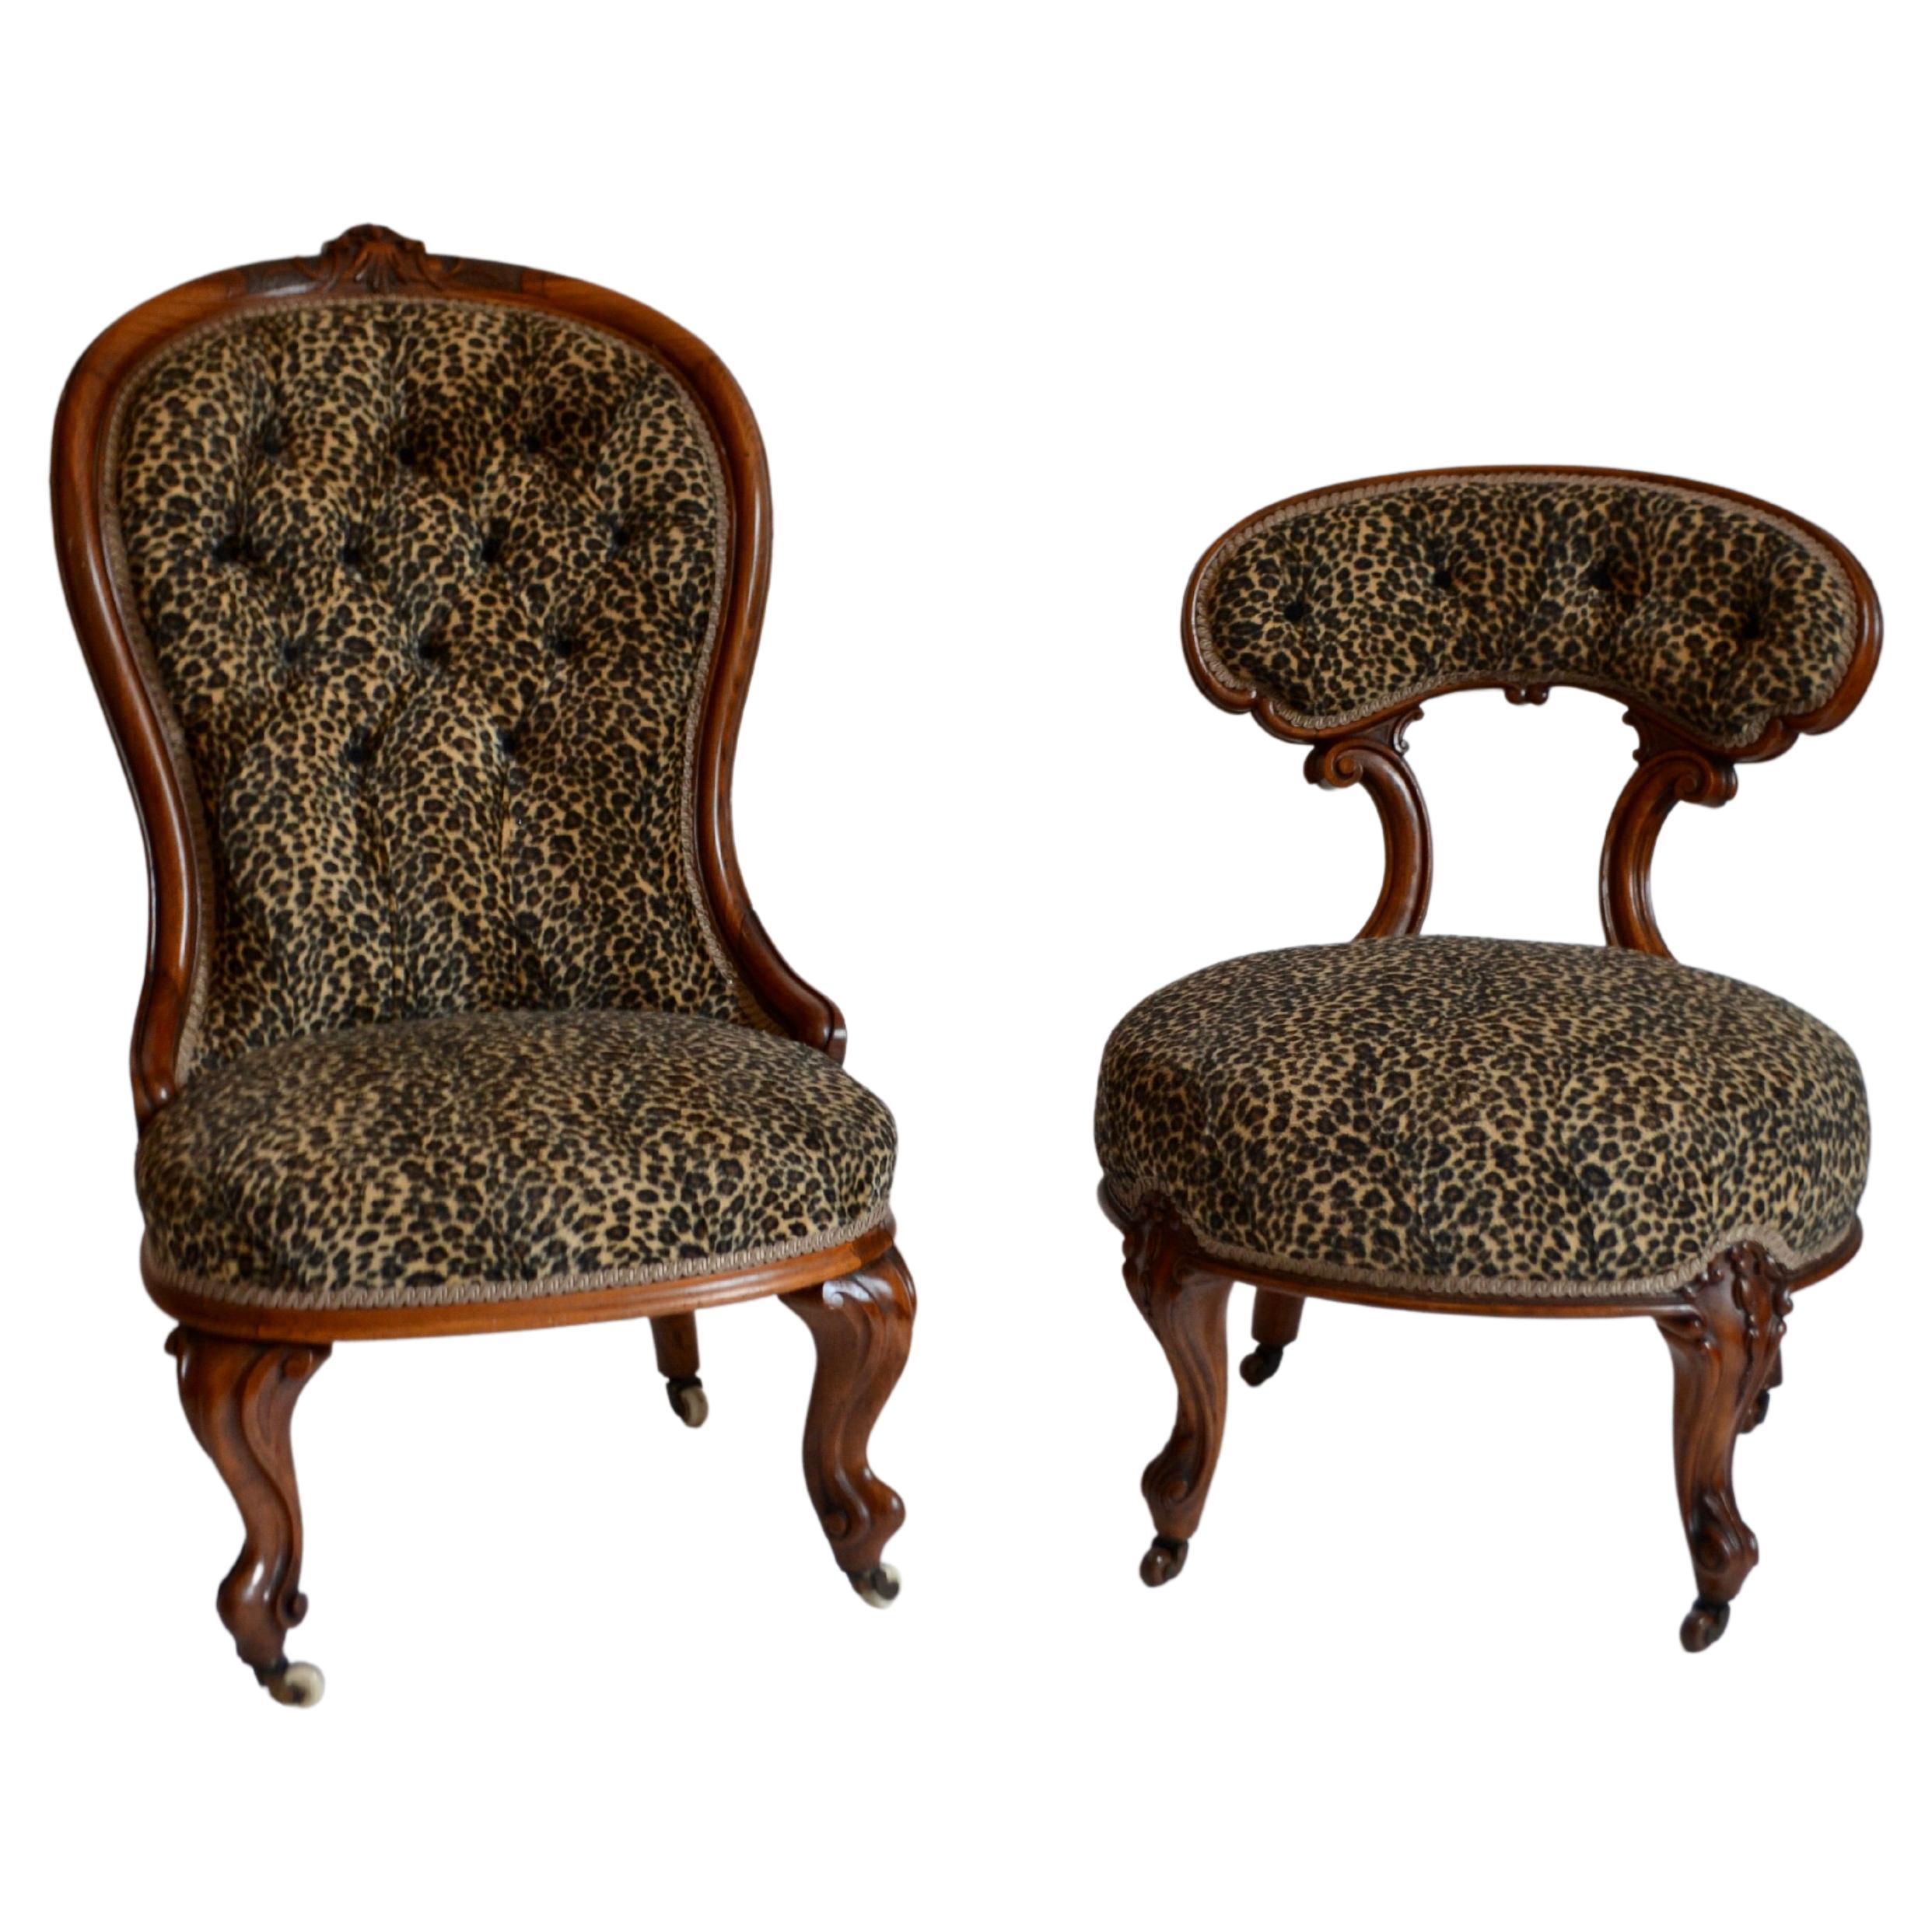 Pair of Victorian Walnut Chairs Upholstered in Faux Leopard Skin, 19th Century For Sale